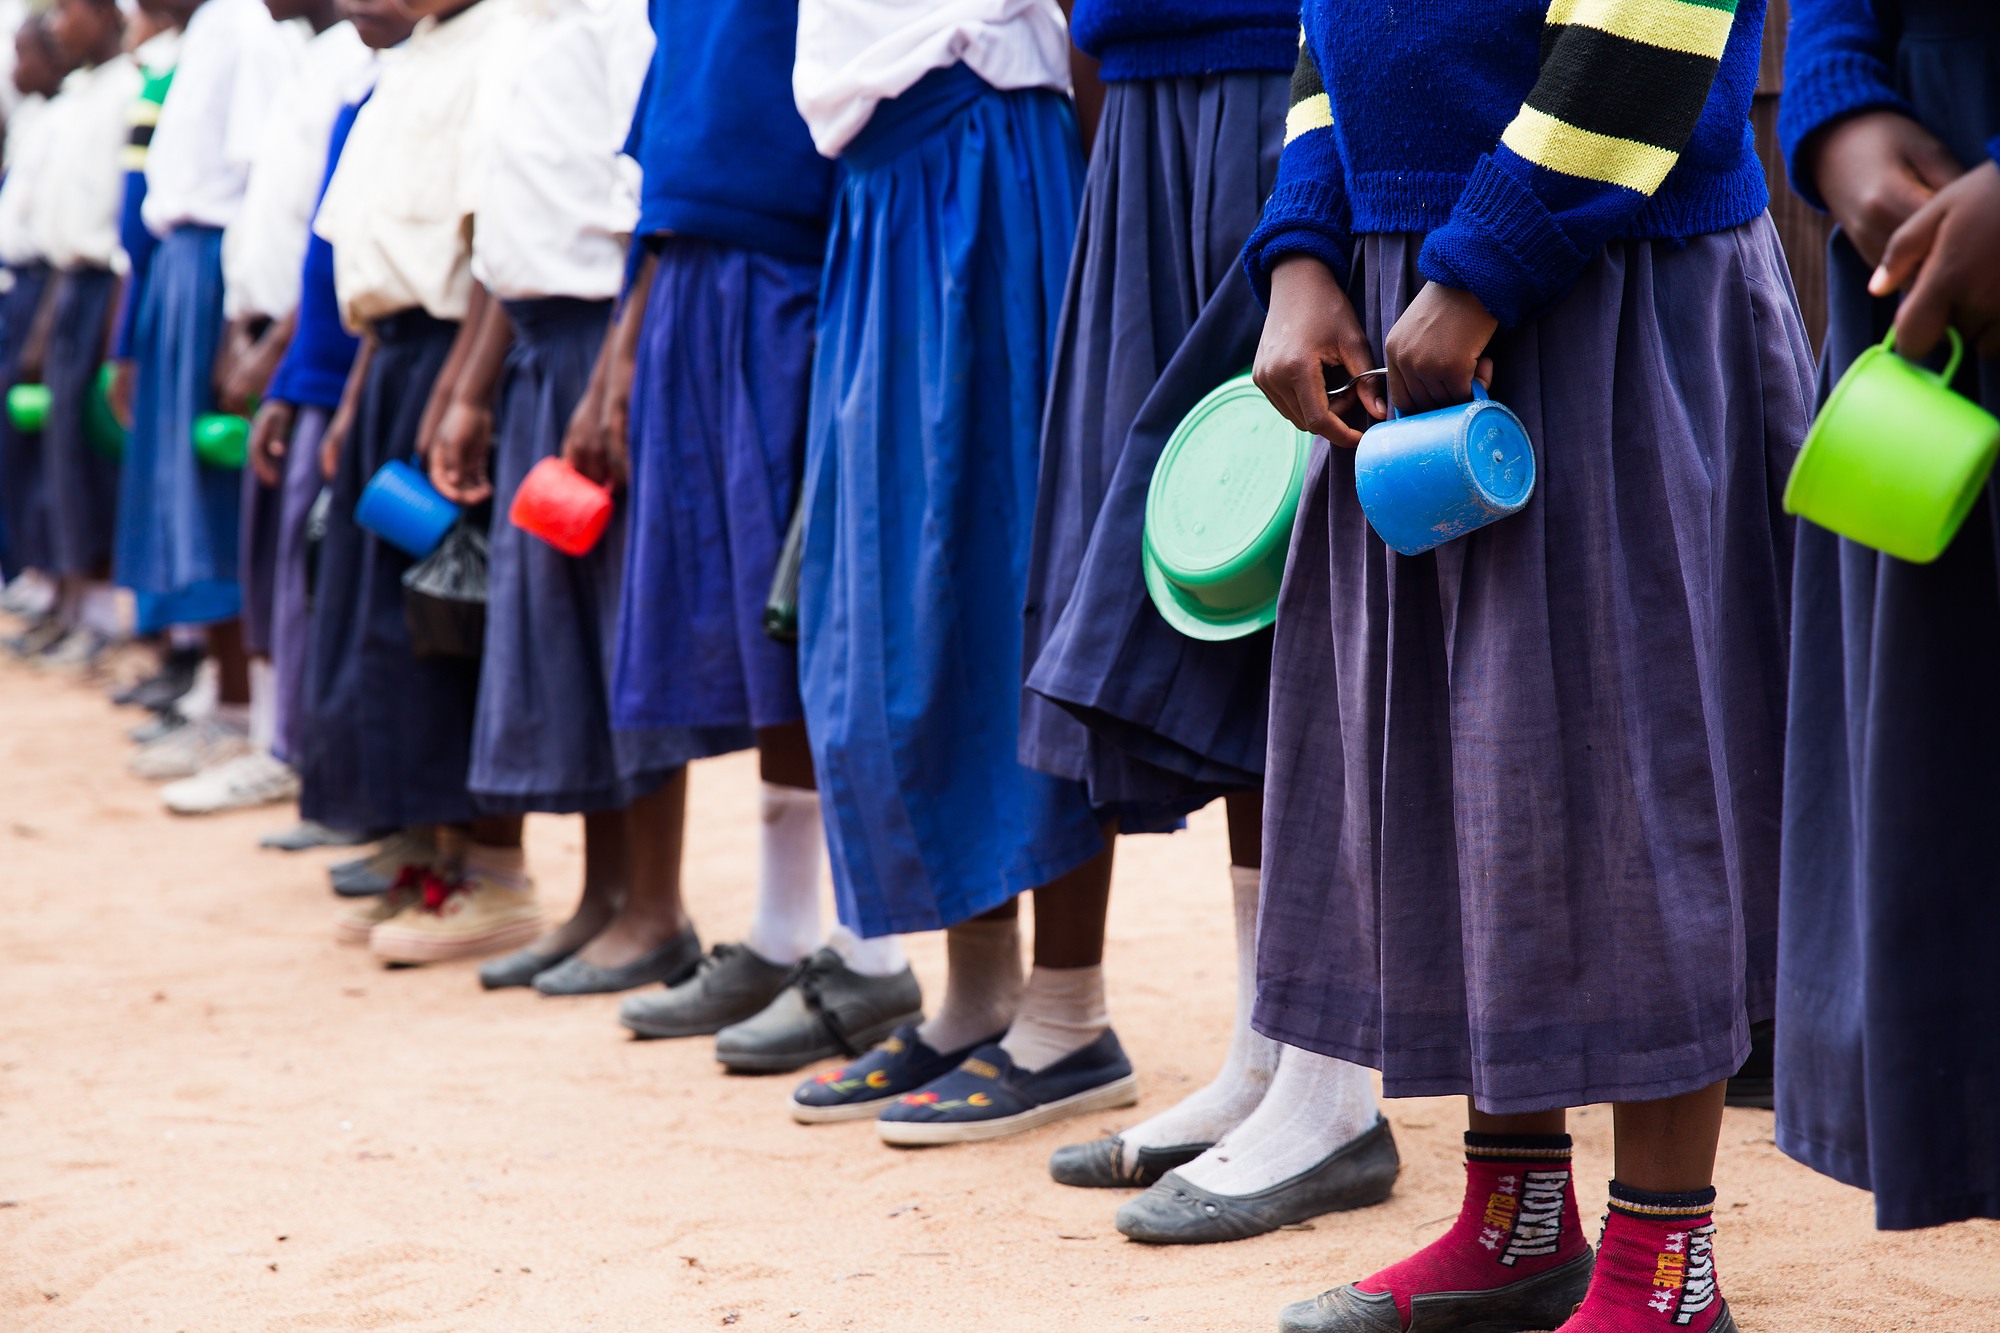 Students lined up, seen from the waist down, holding bowls and cups in their hands